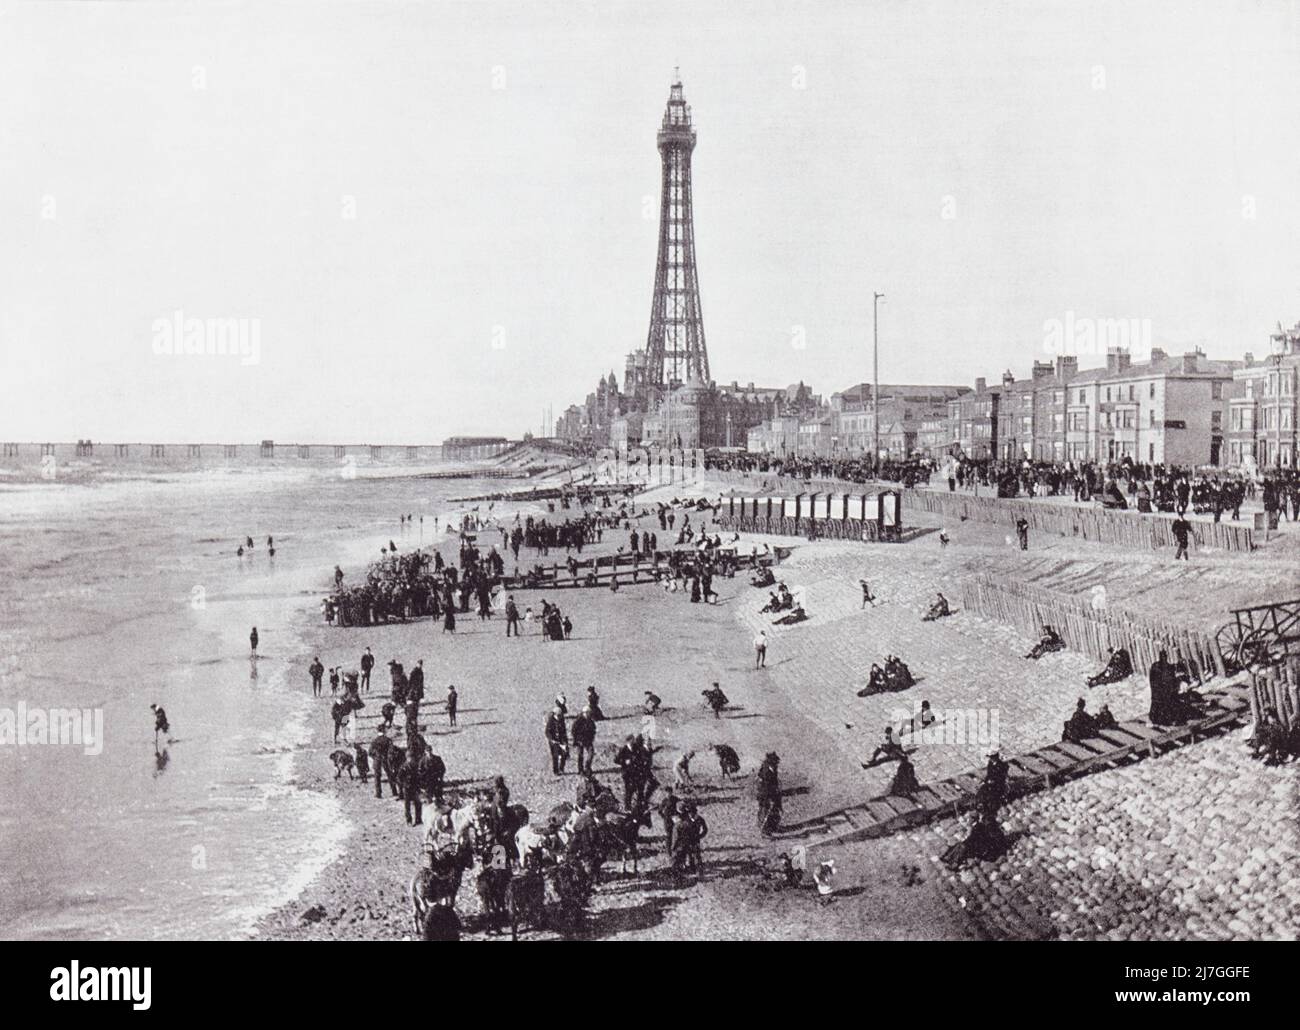 Blackpool, Lancashire, England.  The front and the tower seen here in the 19th century.  From Around The Coast,  An Album of Pictures from Photographs of the Chief Seaside Places of Interest in Great Britain and Ireland published London, 1895, by George Newnes Limited. Stock Photo